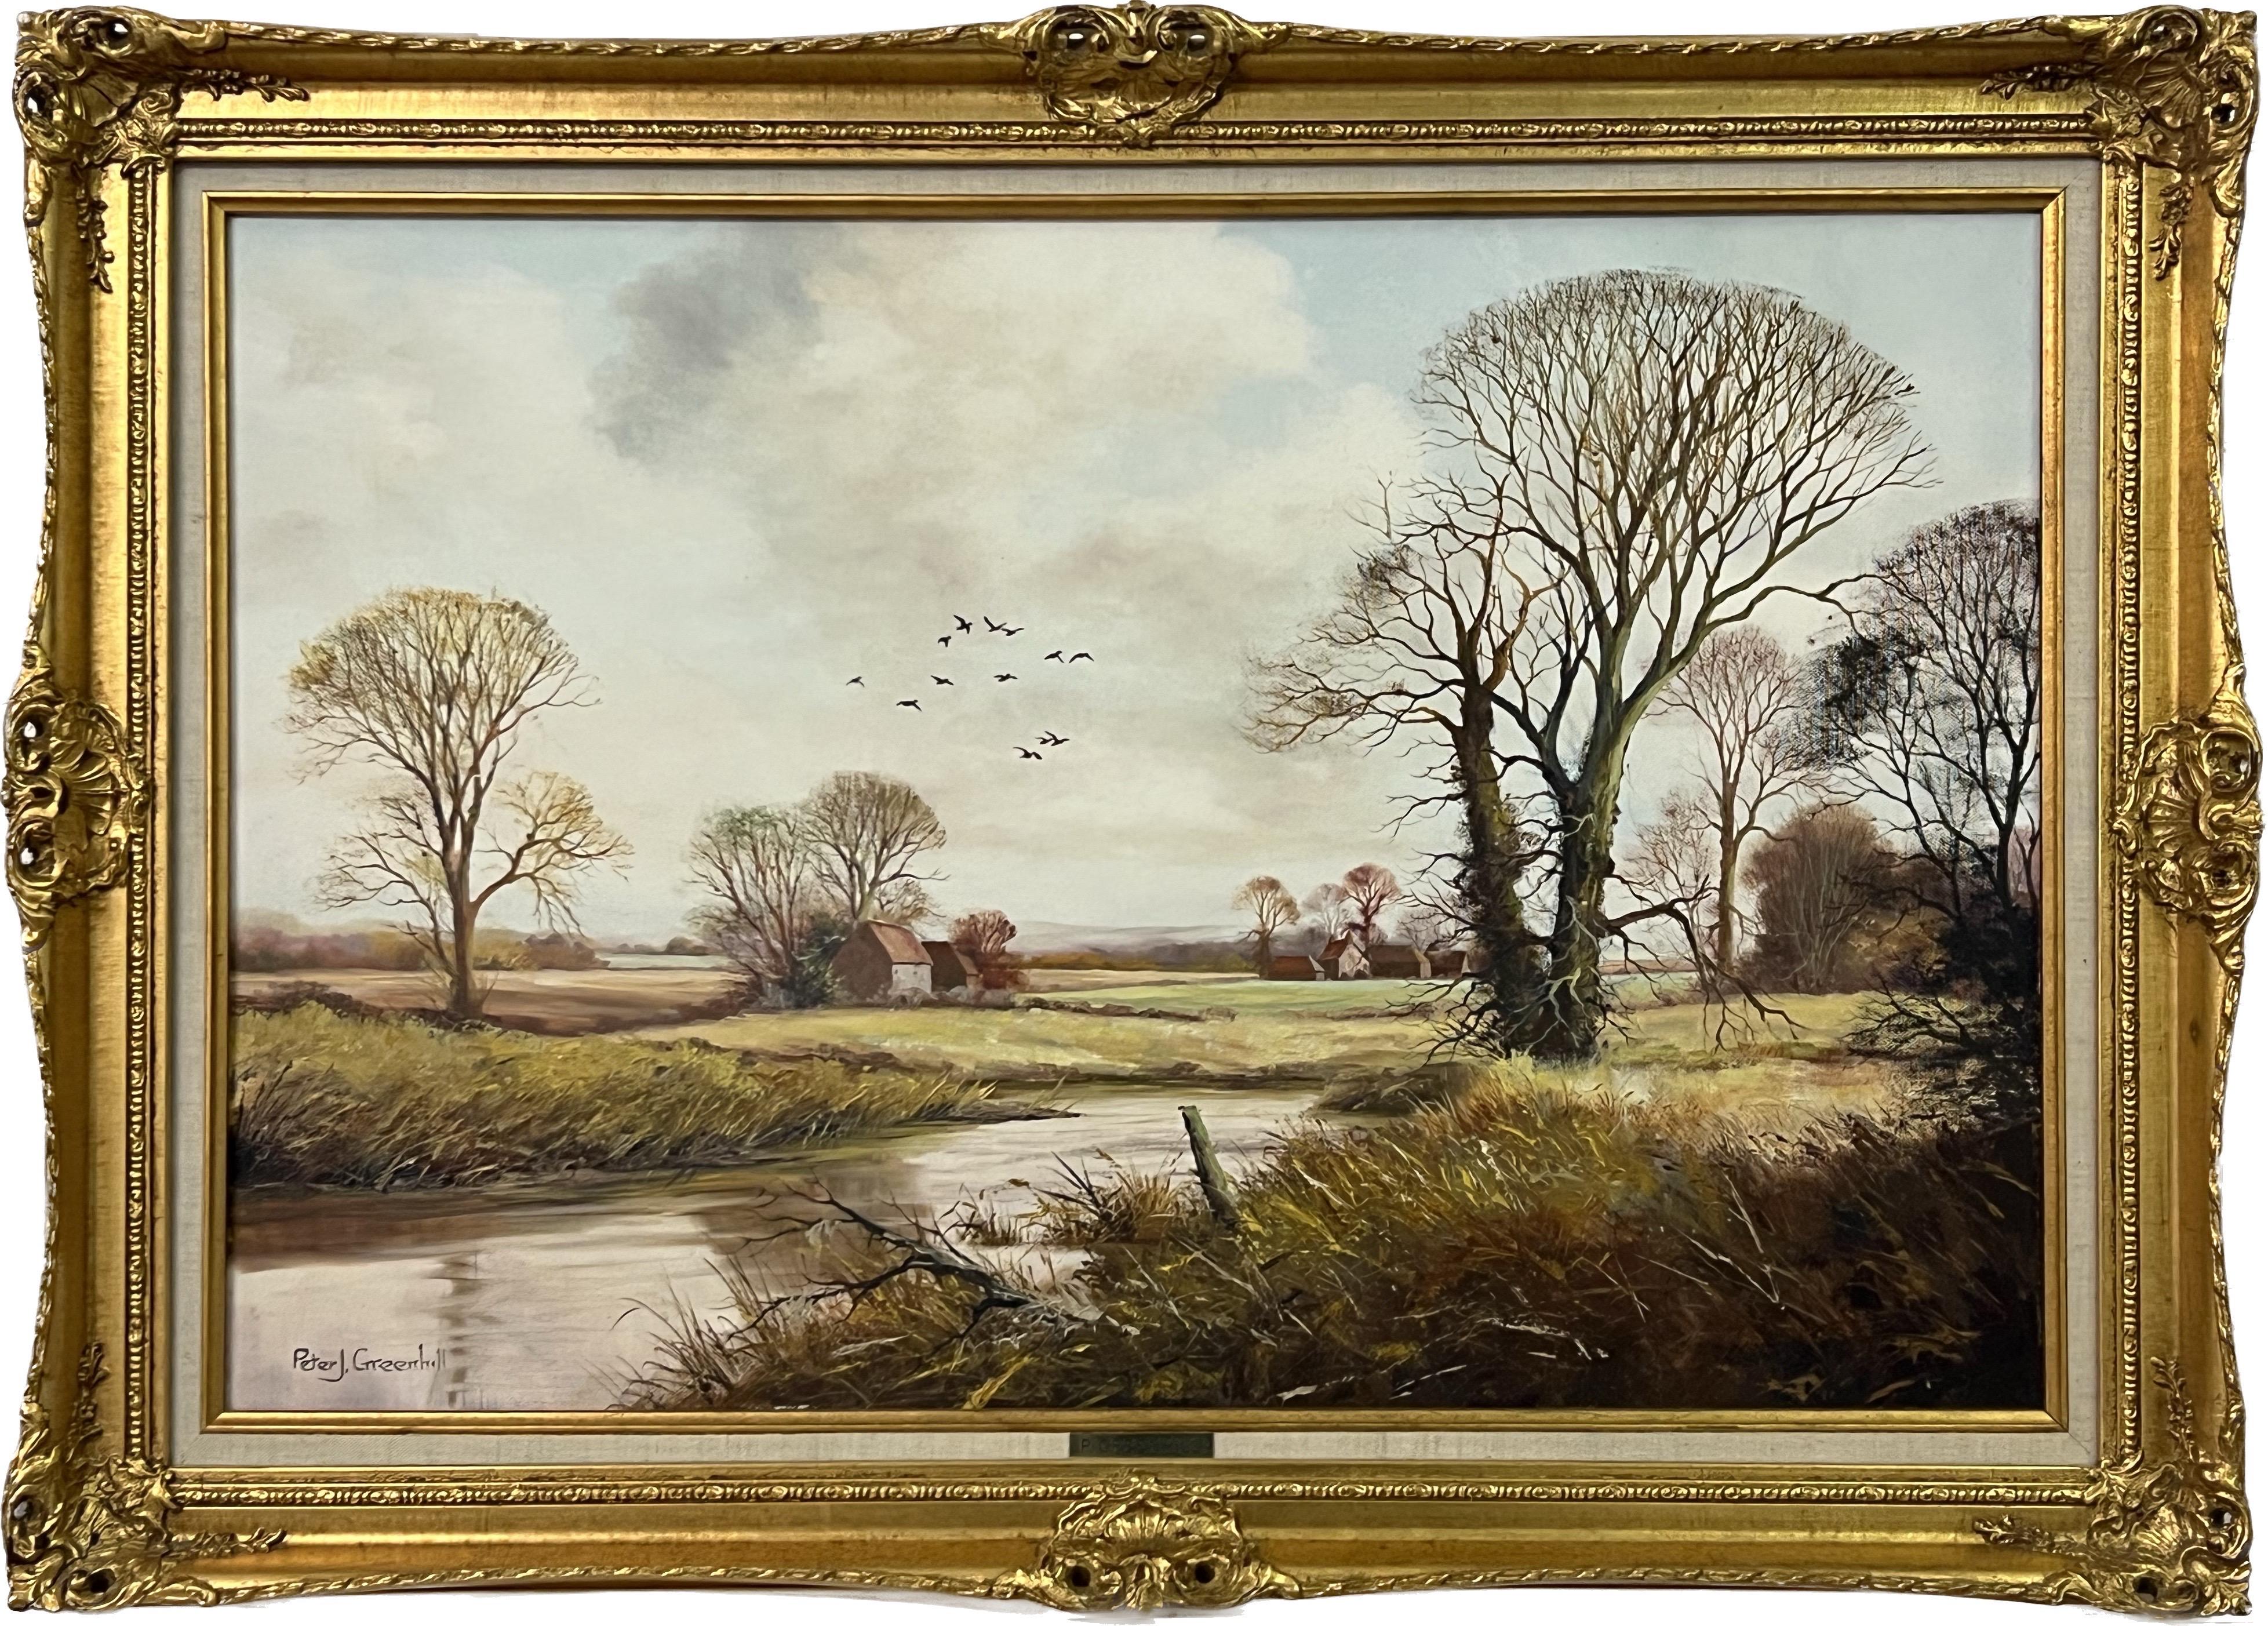 Peter J Greenhill Landscape Painting - Oil painting of an English Country Landscape by 20th Century British Artist